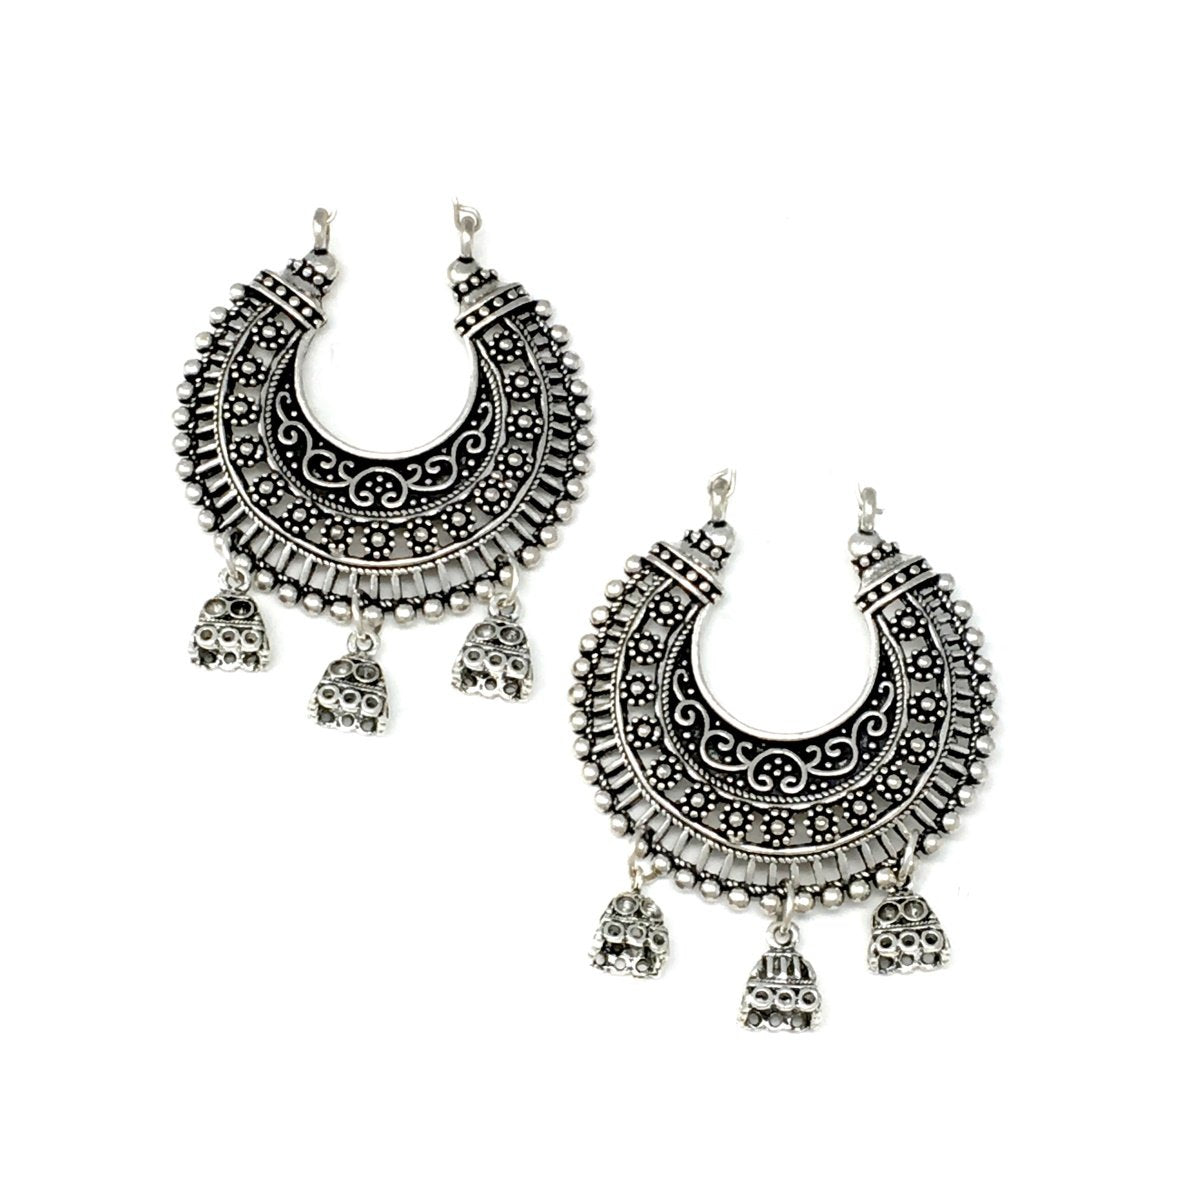 Indian Traditional Bollywood Style Silver Oxidized Jhumka Ethnic Hoop  Earrings 1 | eBay